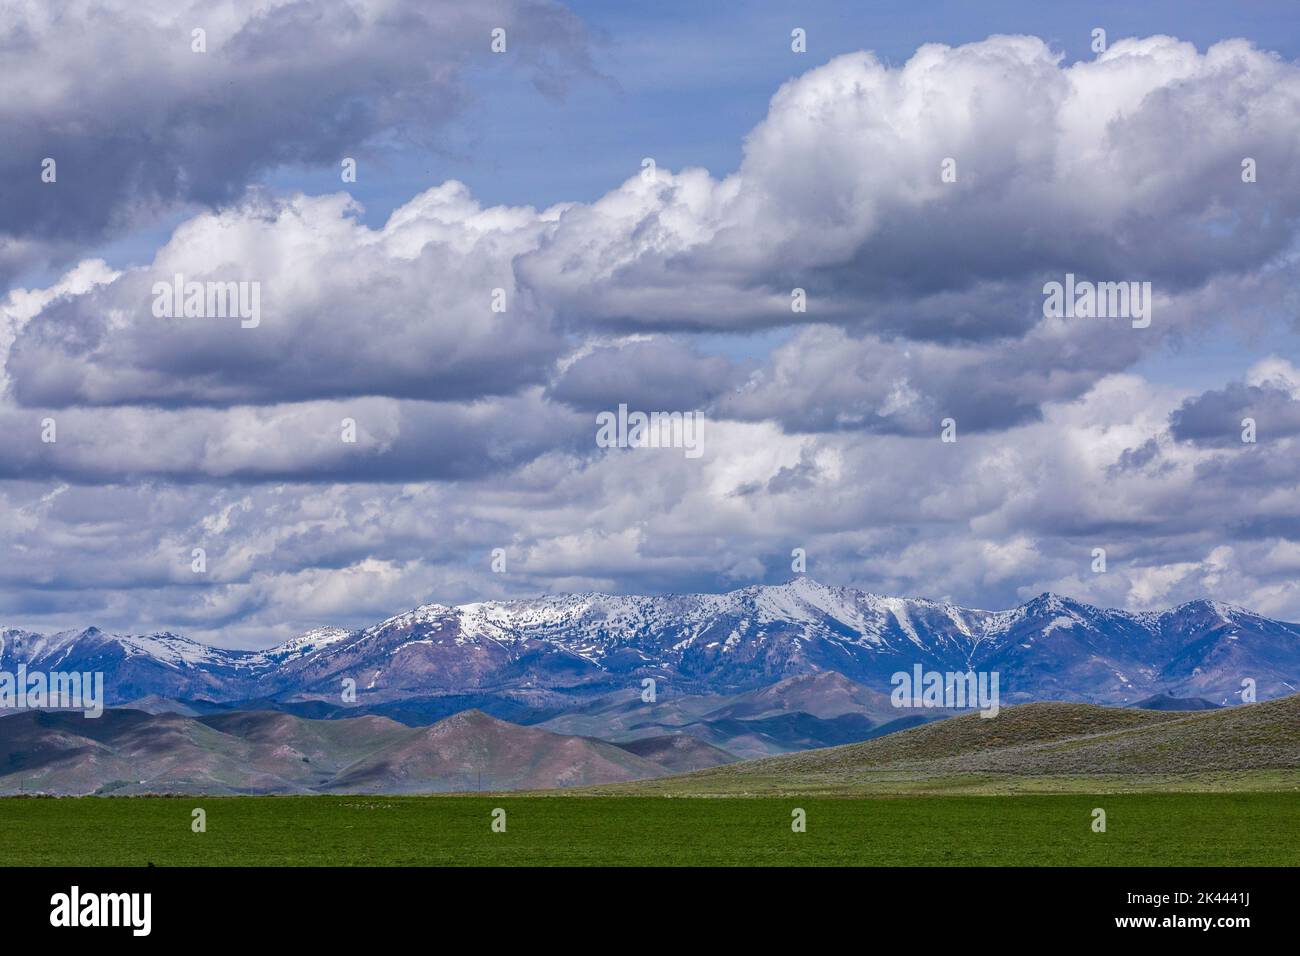 Usa, Idaho, Fairfield, Dramatic clouds over snowcapped Soldier Mountain Stock Photo